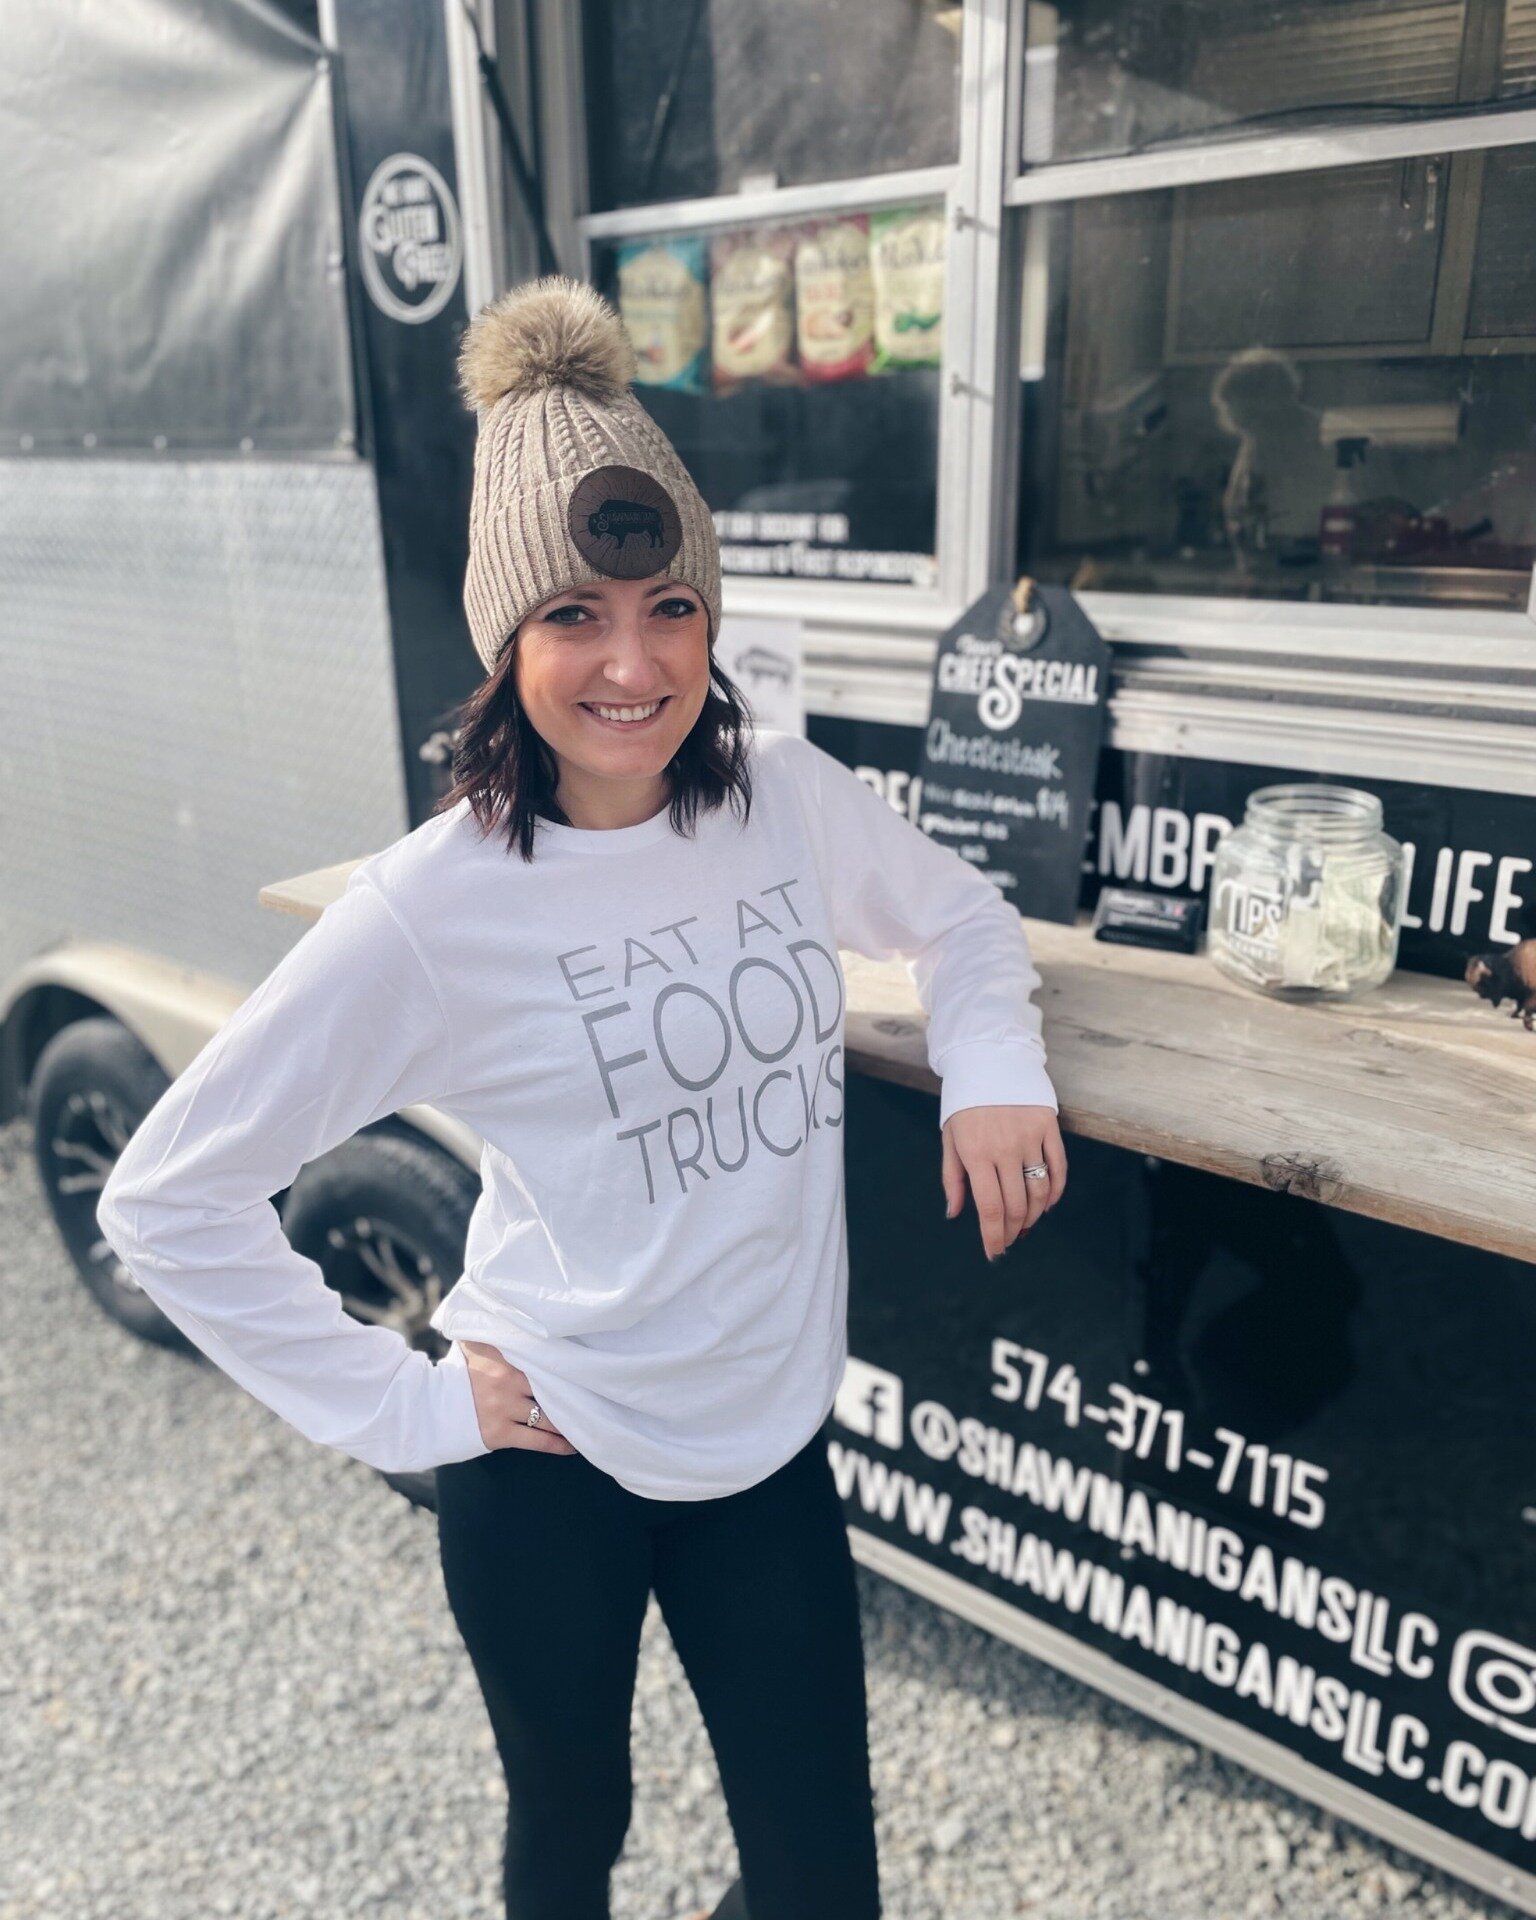 We live life by two mottos: 

1. Eat at Food Trucks 
 ...because when you do, you're supporting local and more often than not, you'll find someone who is passionate about food and people behind the window 

2. Collaboration Over Competition 
 ...beca